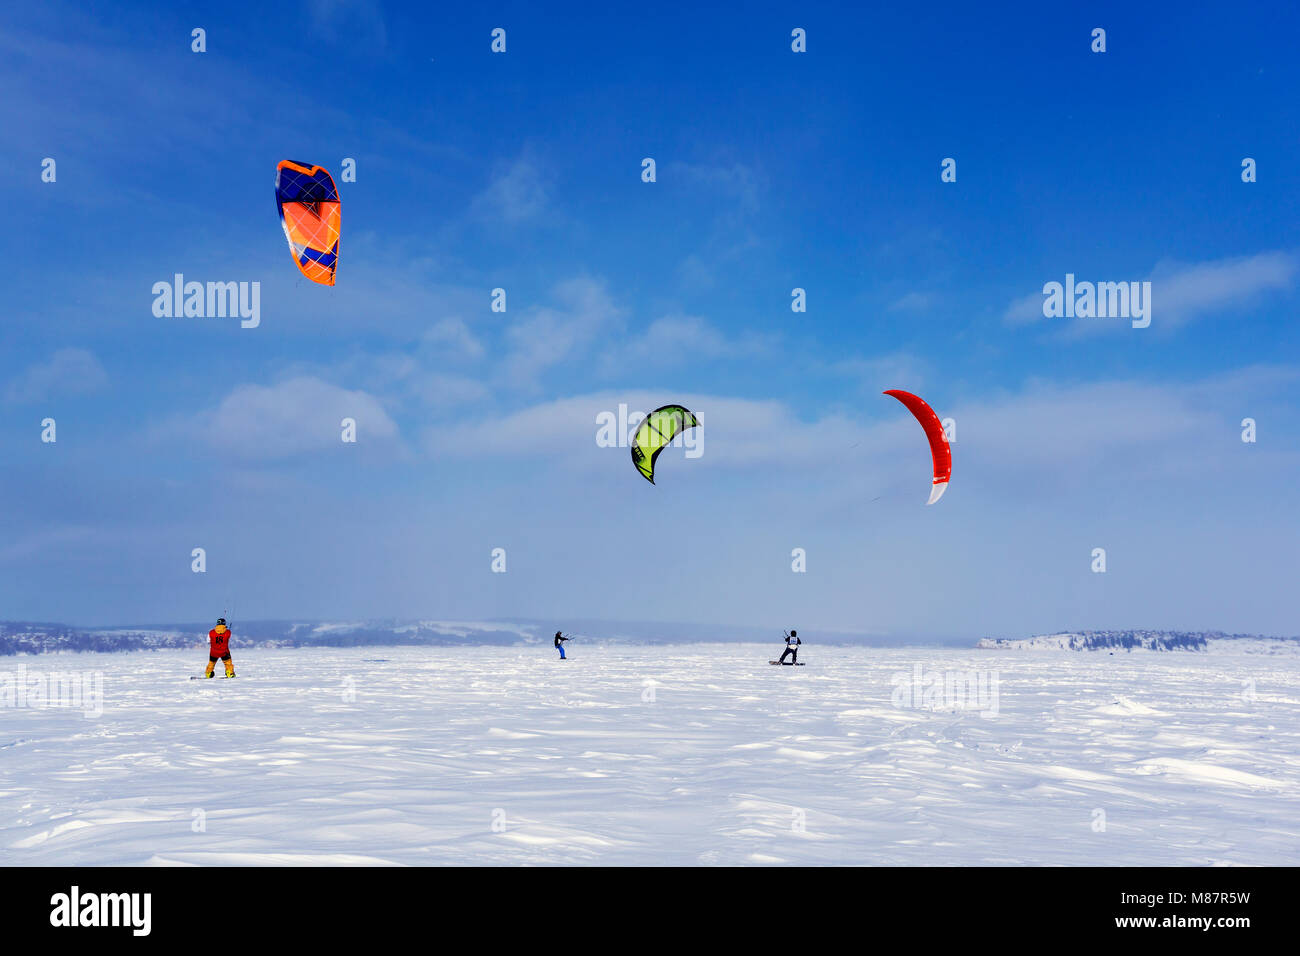 PERM, RUSSIA - MARCH 09, 2018: snow kiters train on the ice of a frozen lake in the background of a winter landscape Stock Photo